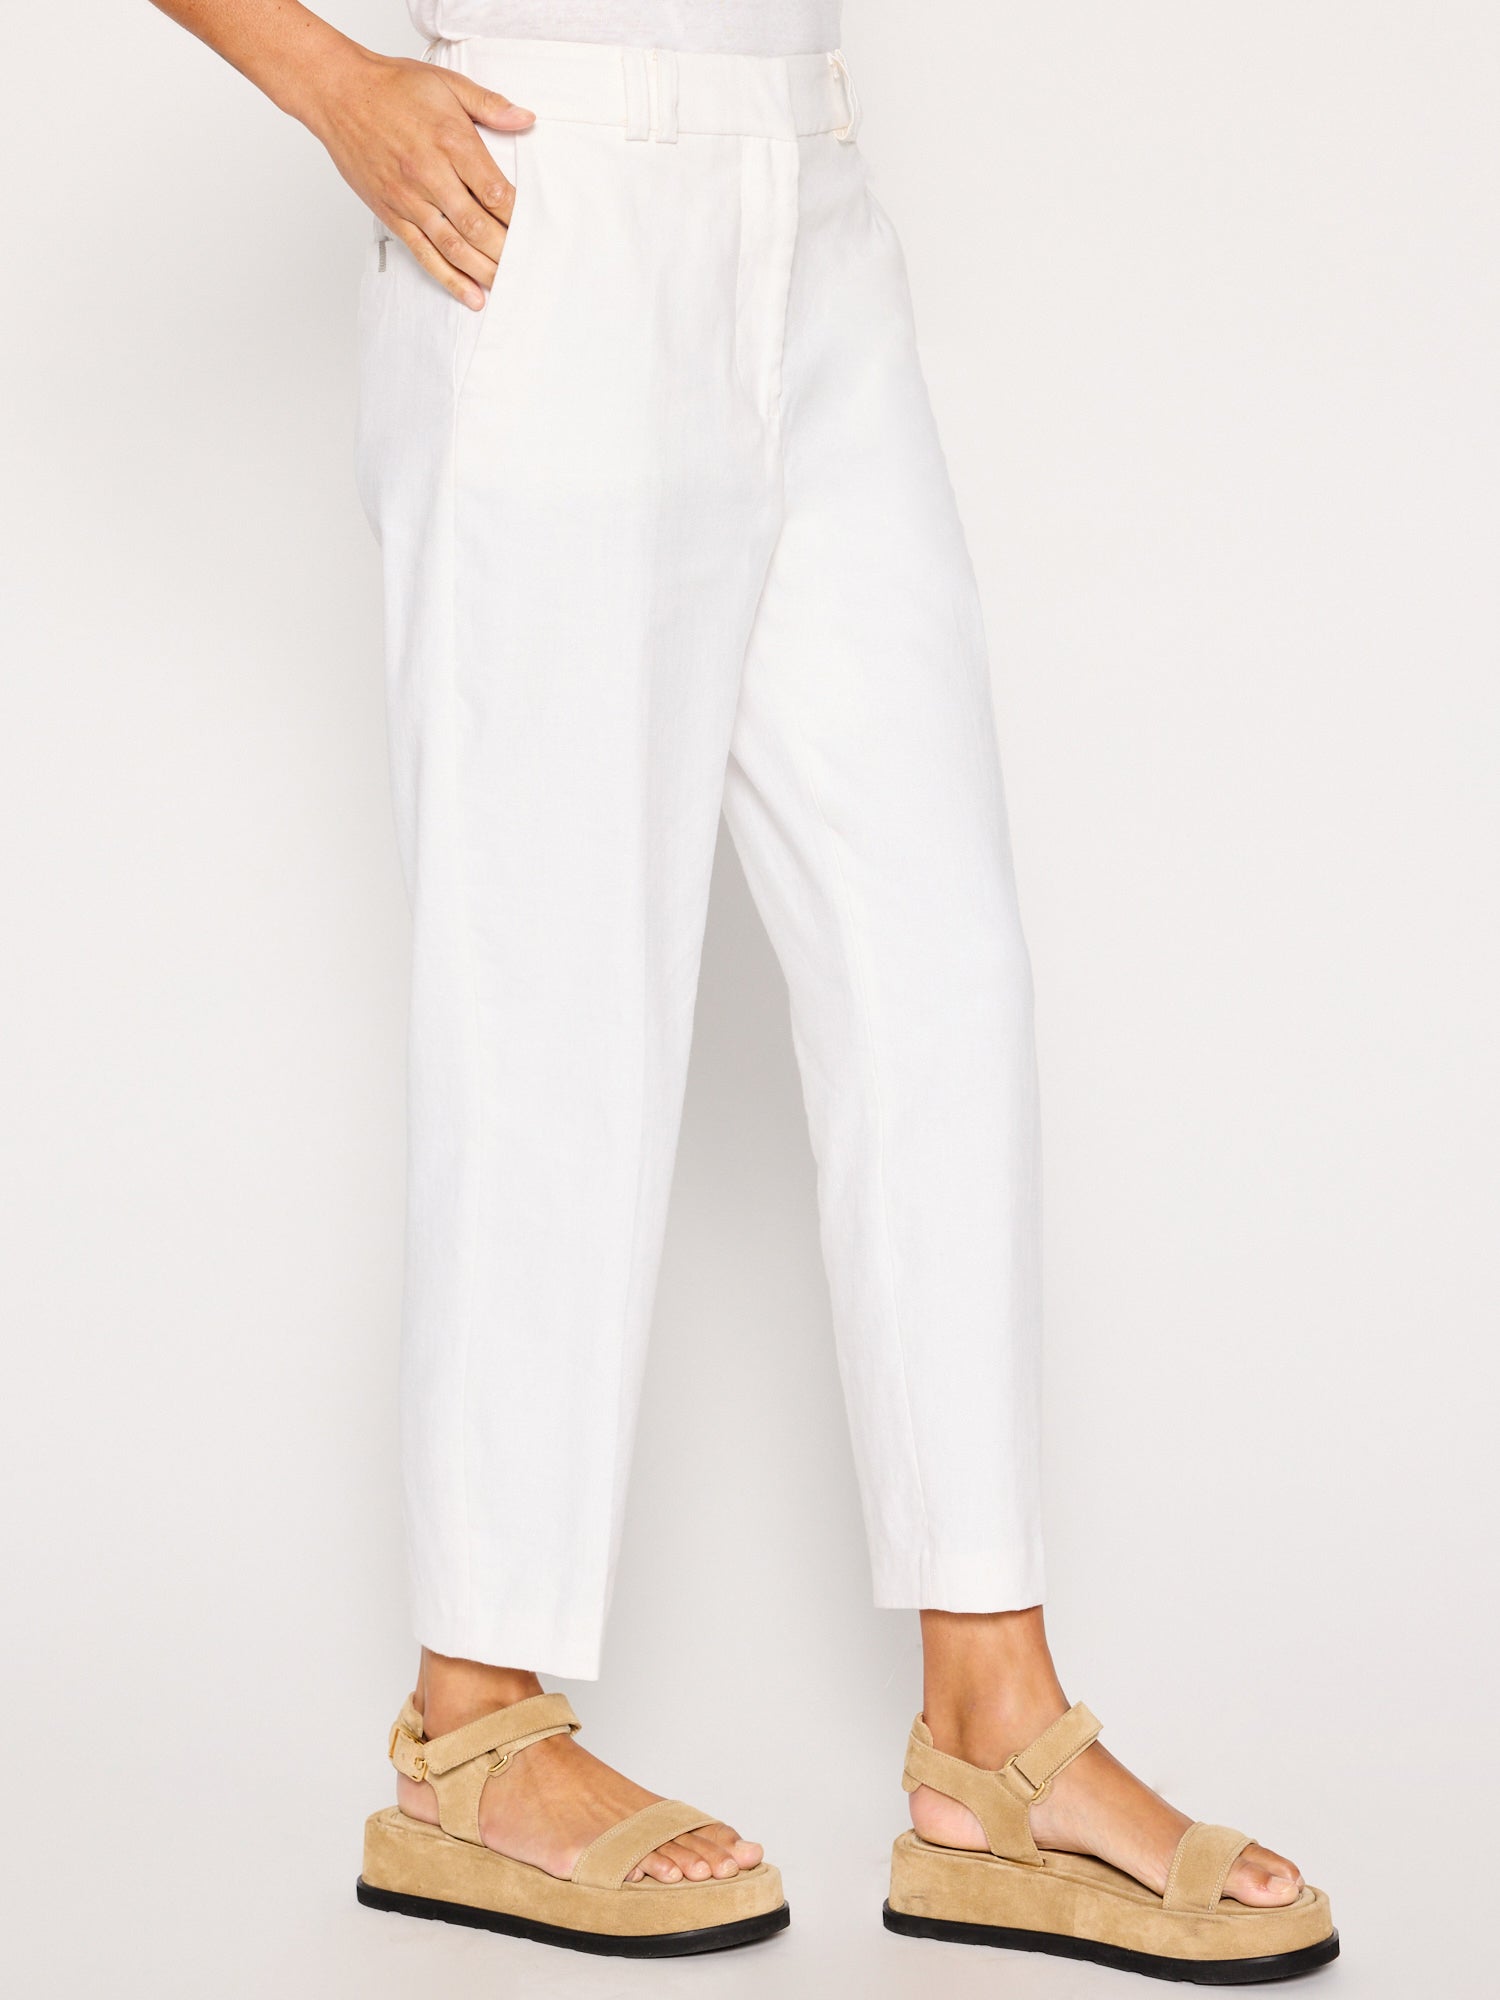 Q-Rious Regular Fit Women White Trousers - Buy White Q-Rious Regular Fit Women  White Trousers Online at Best Prices in India | Flipkart.com